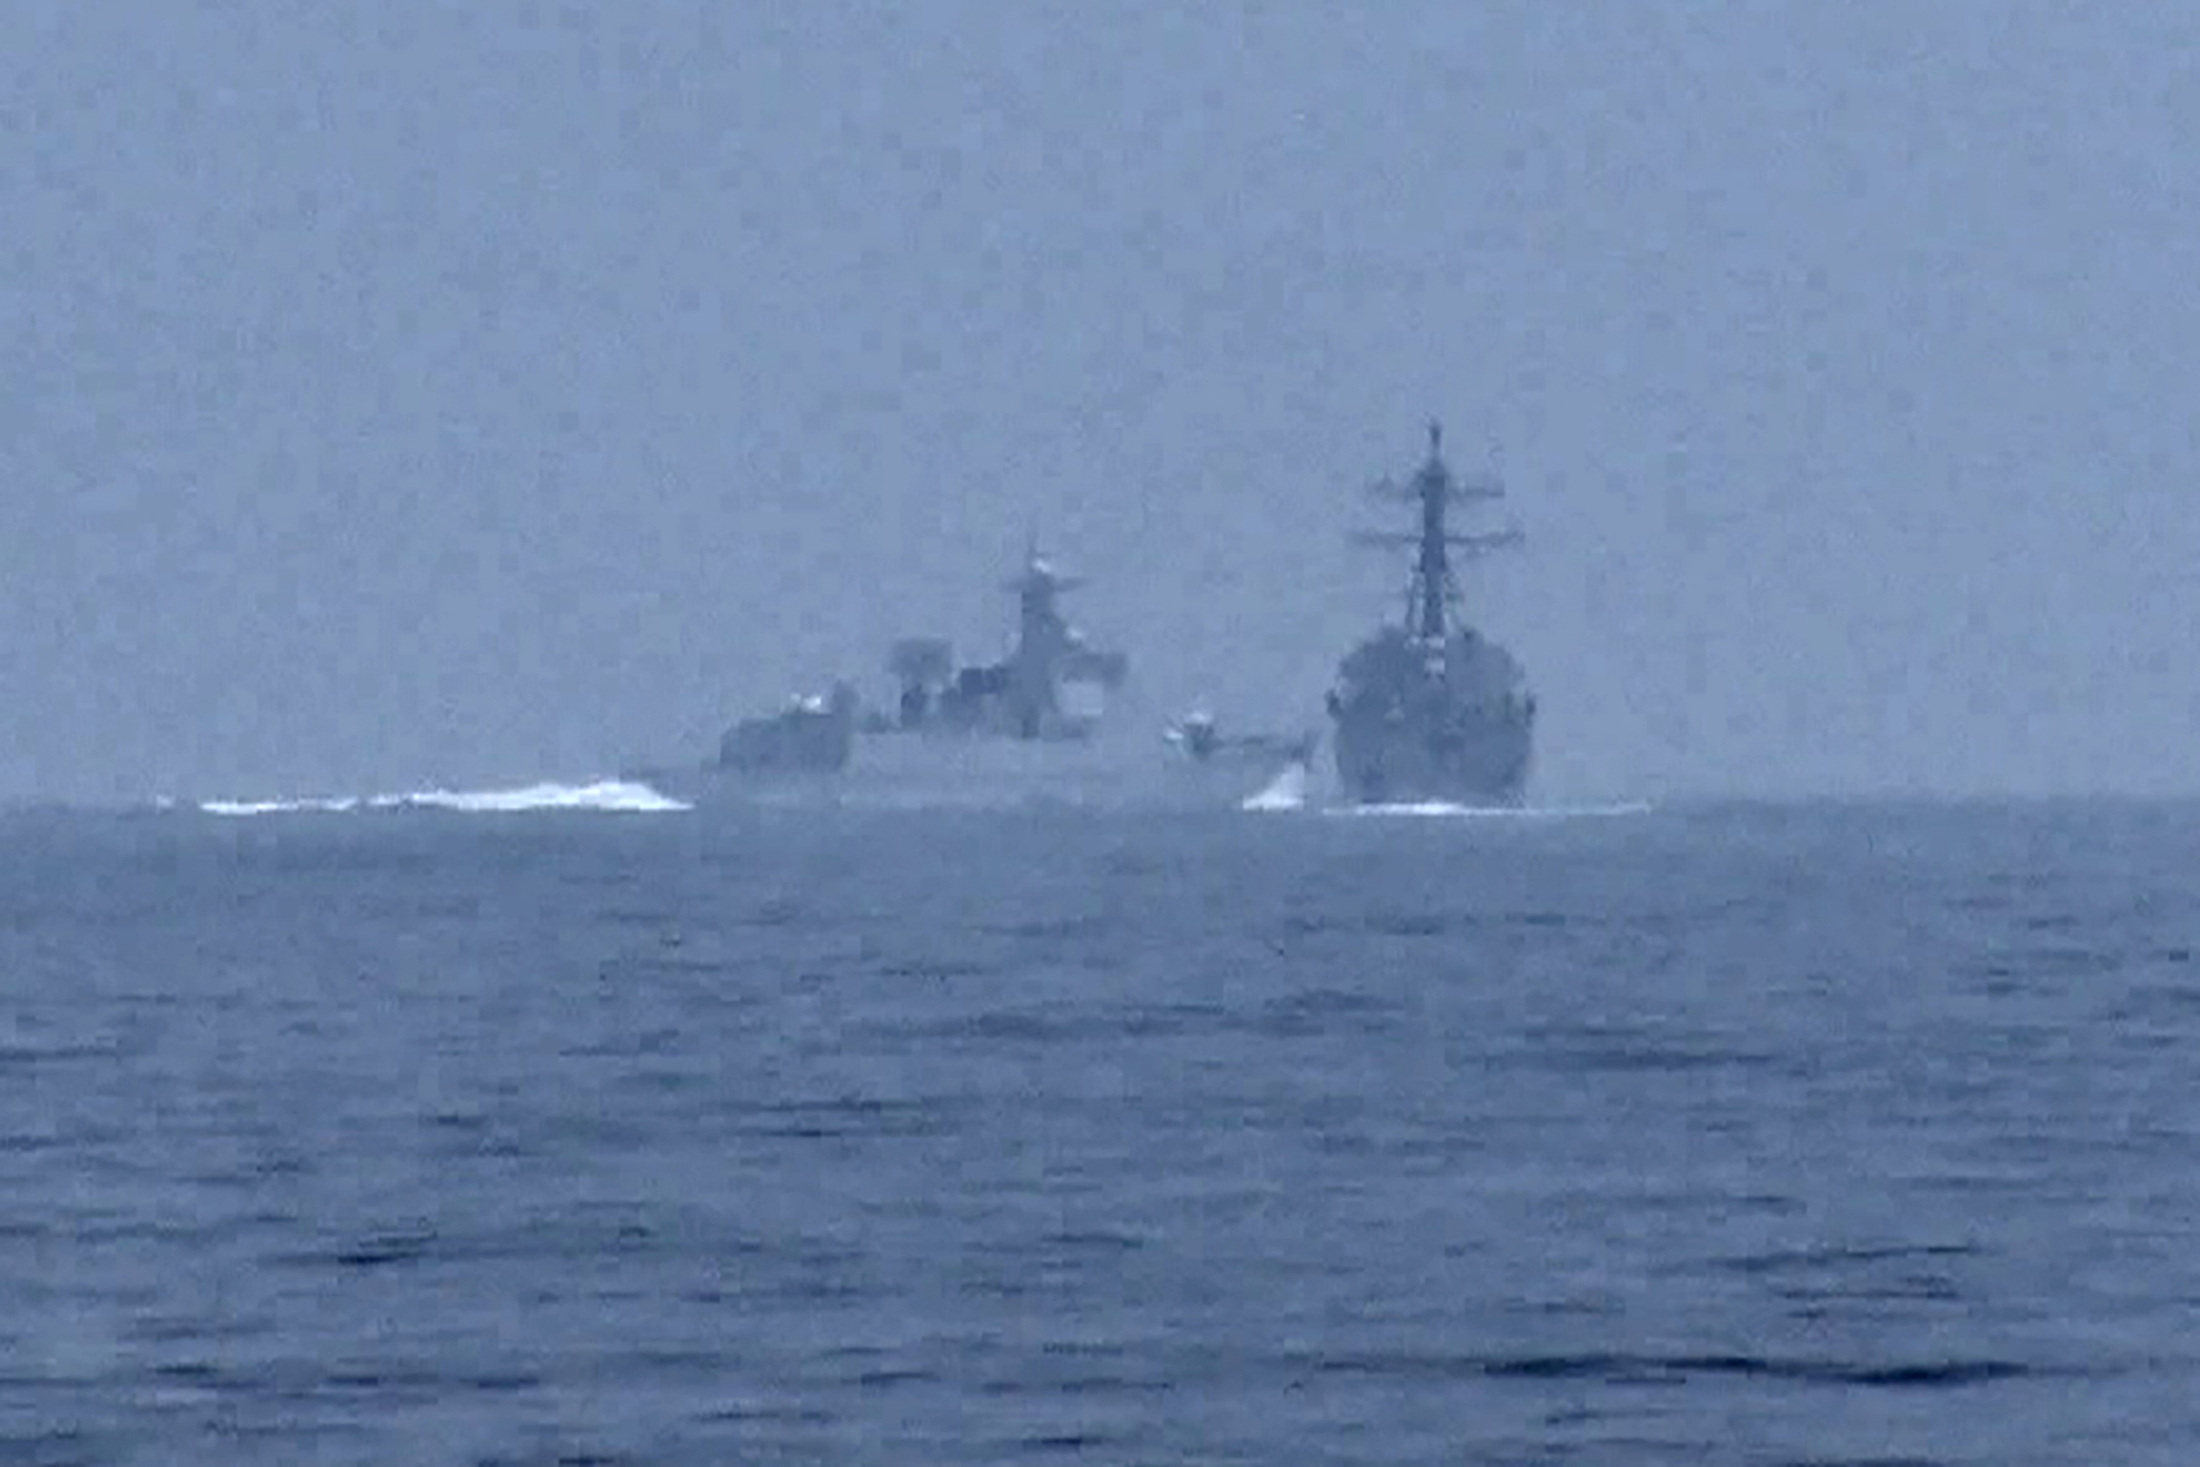 A Chinese warship, identified by the US Indo-Pacific Command as PRC LY 132, crosses the path of the US Navy destroyer Chung-Hoon in the Taiwan Strait on Saturday. Photo: Global News via Reuters